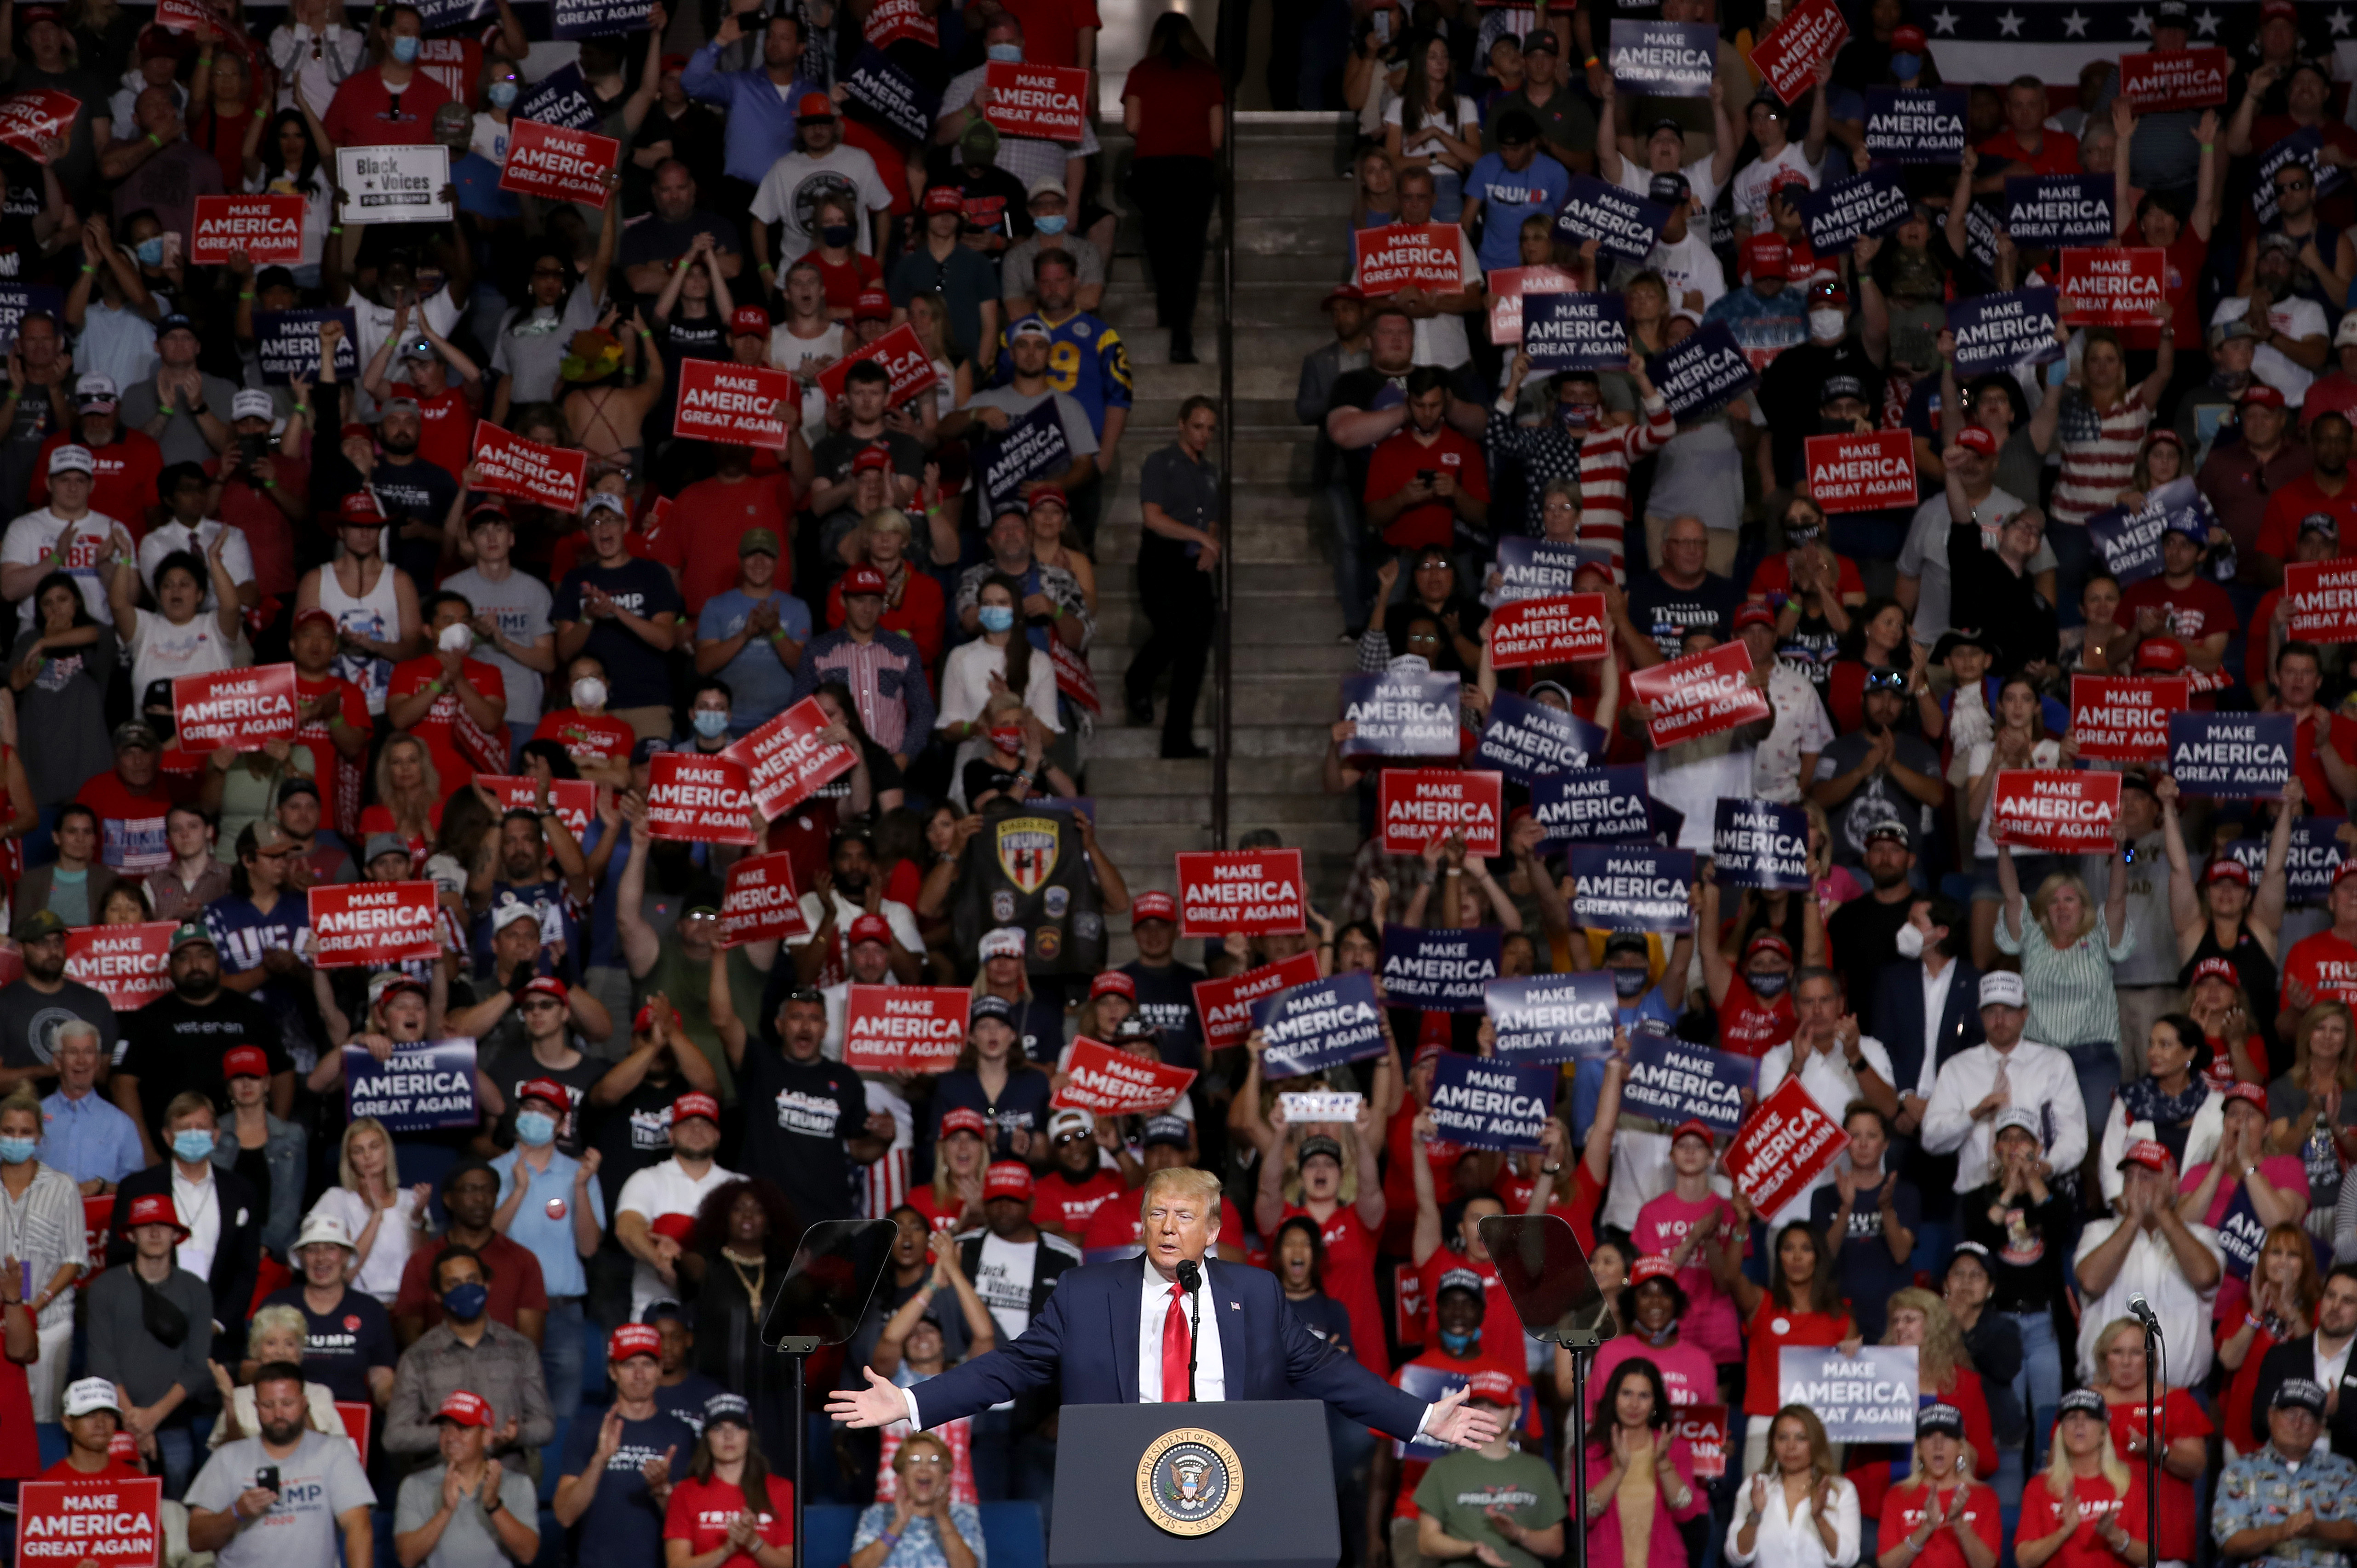 TULSA, OKLAHOMA - JUNE 20: U.S. President Donald Trump speaks at a campaign rally at the BOK Center, June 20, 2020 in Tulsa, Oklahoma. Trump is holding his first political rally since the start of the coronavirus pandemic at the BOK Center today while infection rates in the state of Oklahoma continue to rise. (Photo by Win McNamee/Getty Images)